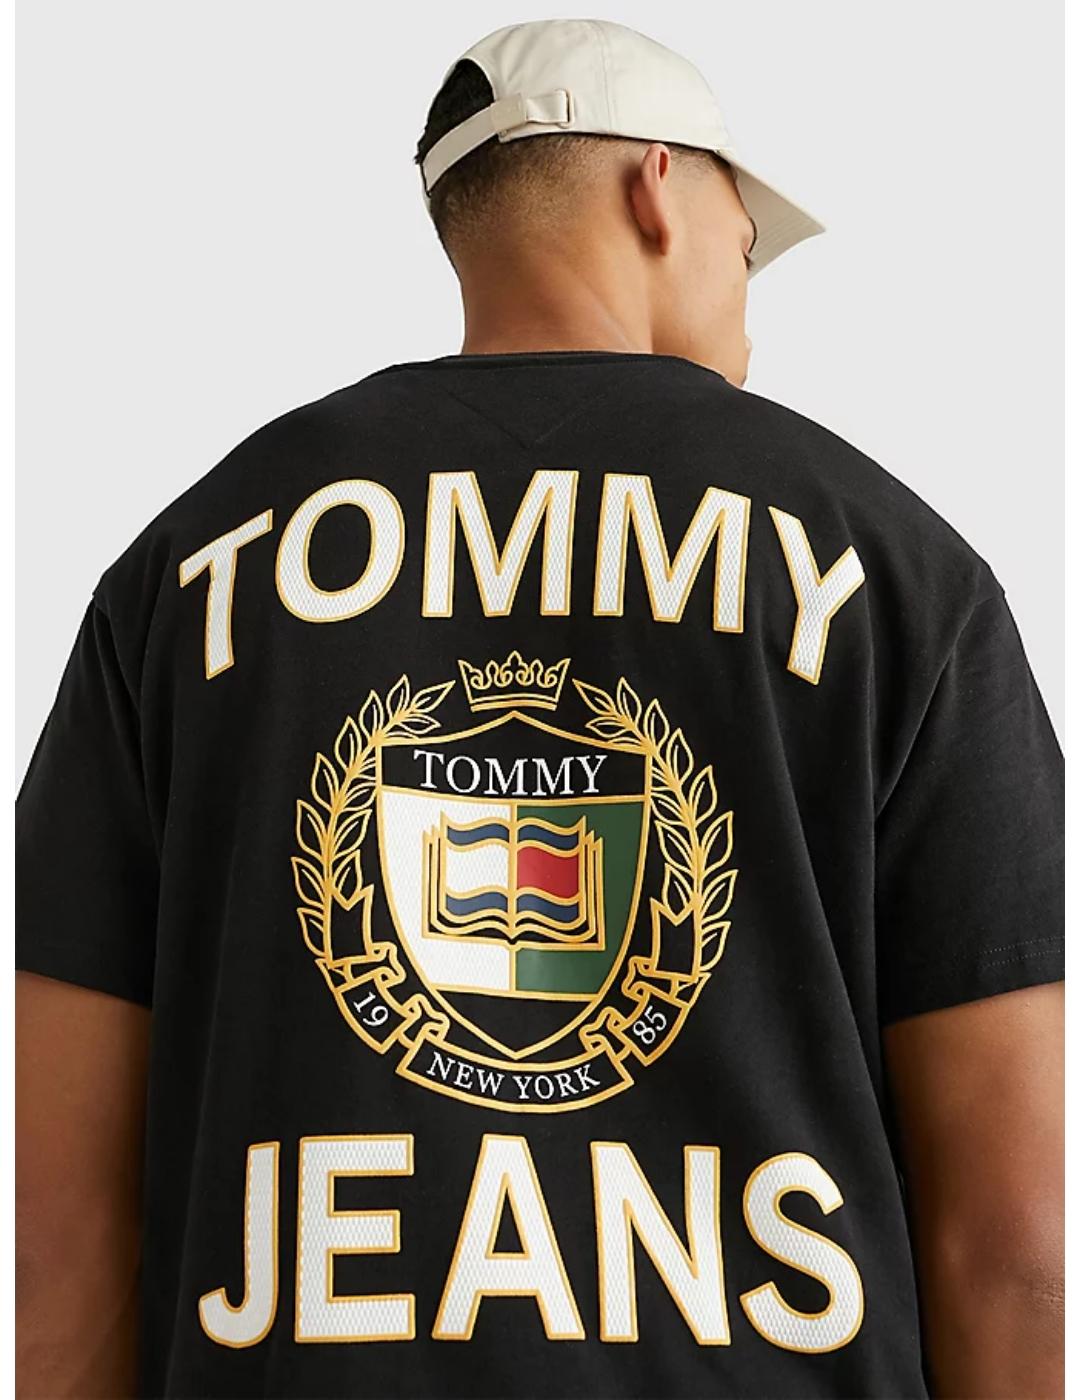 Camiseta Tommy Jeans luxe negra para hombre